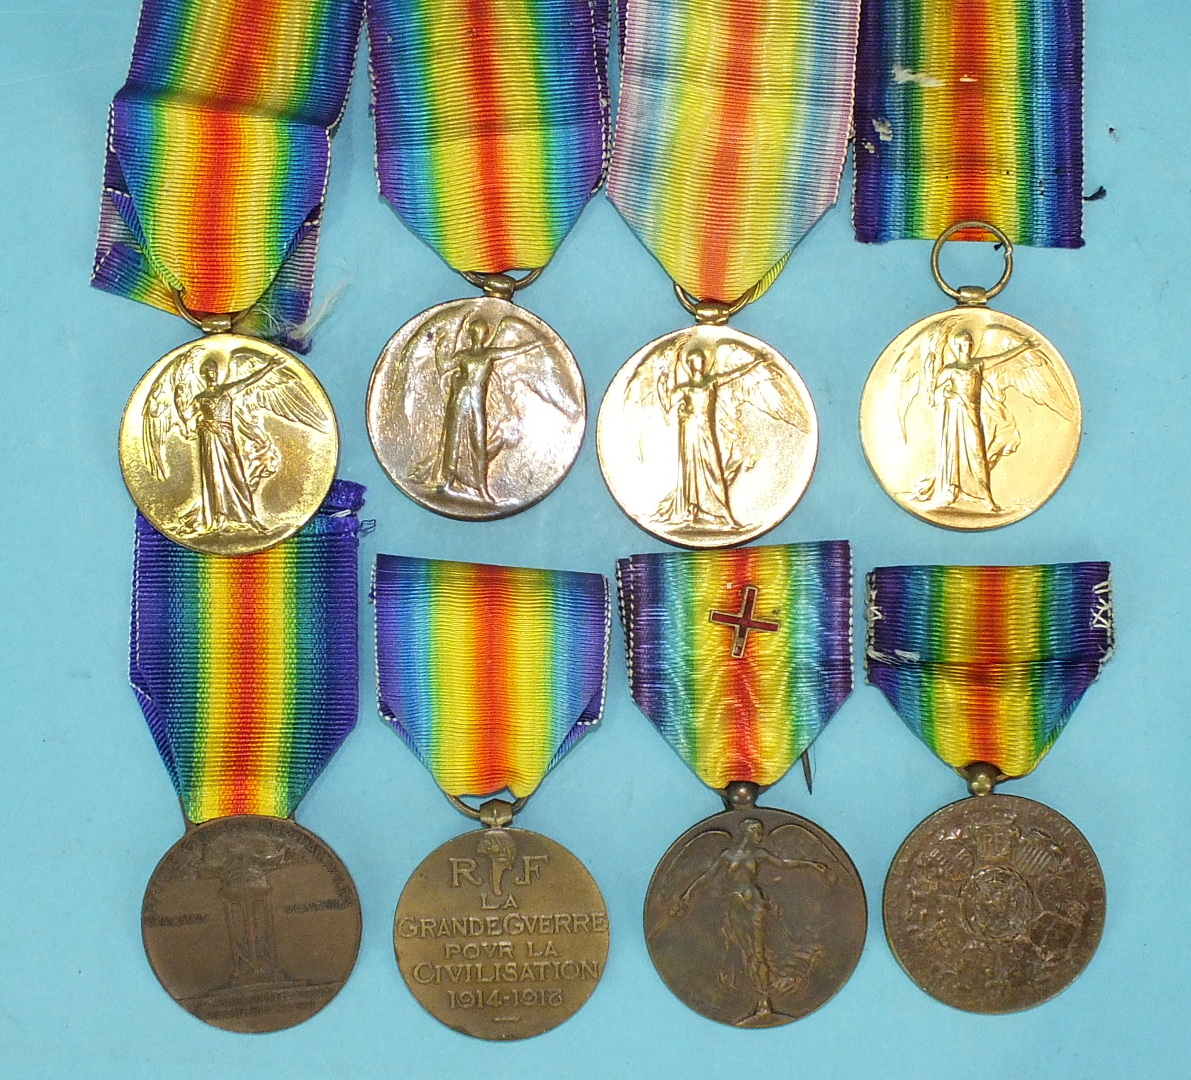 Four Victory medals: 36290 Pte F A Snow, Worc R; PLY 18607 Bugr W C Werry RMLI; 280394 N Yabsley S P